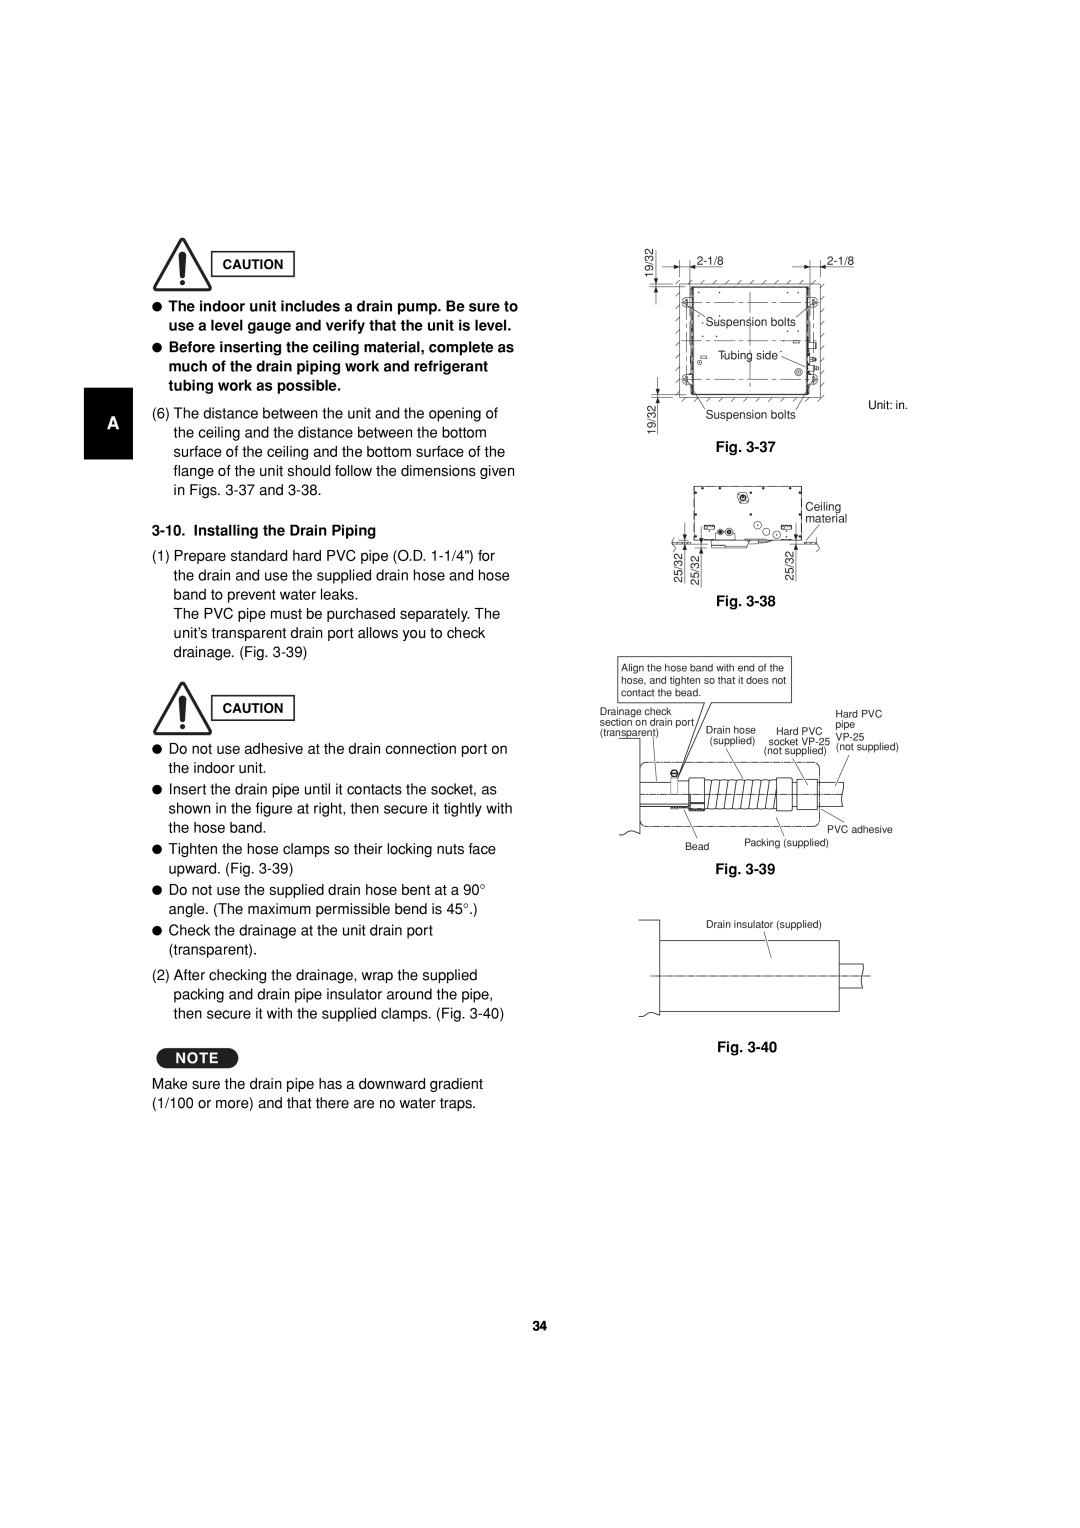 Sanyo 85464359981002 installation instructions Installing the Drain Piping, Fig 